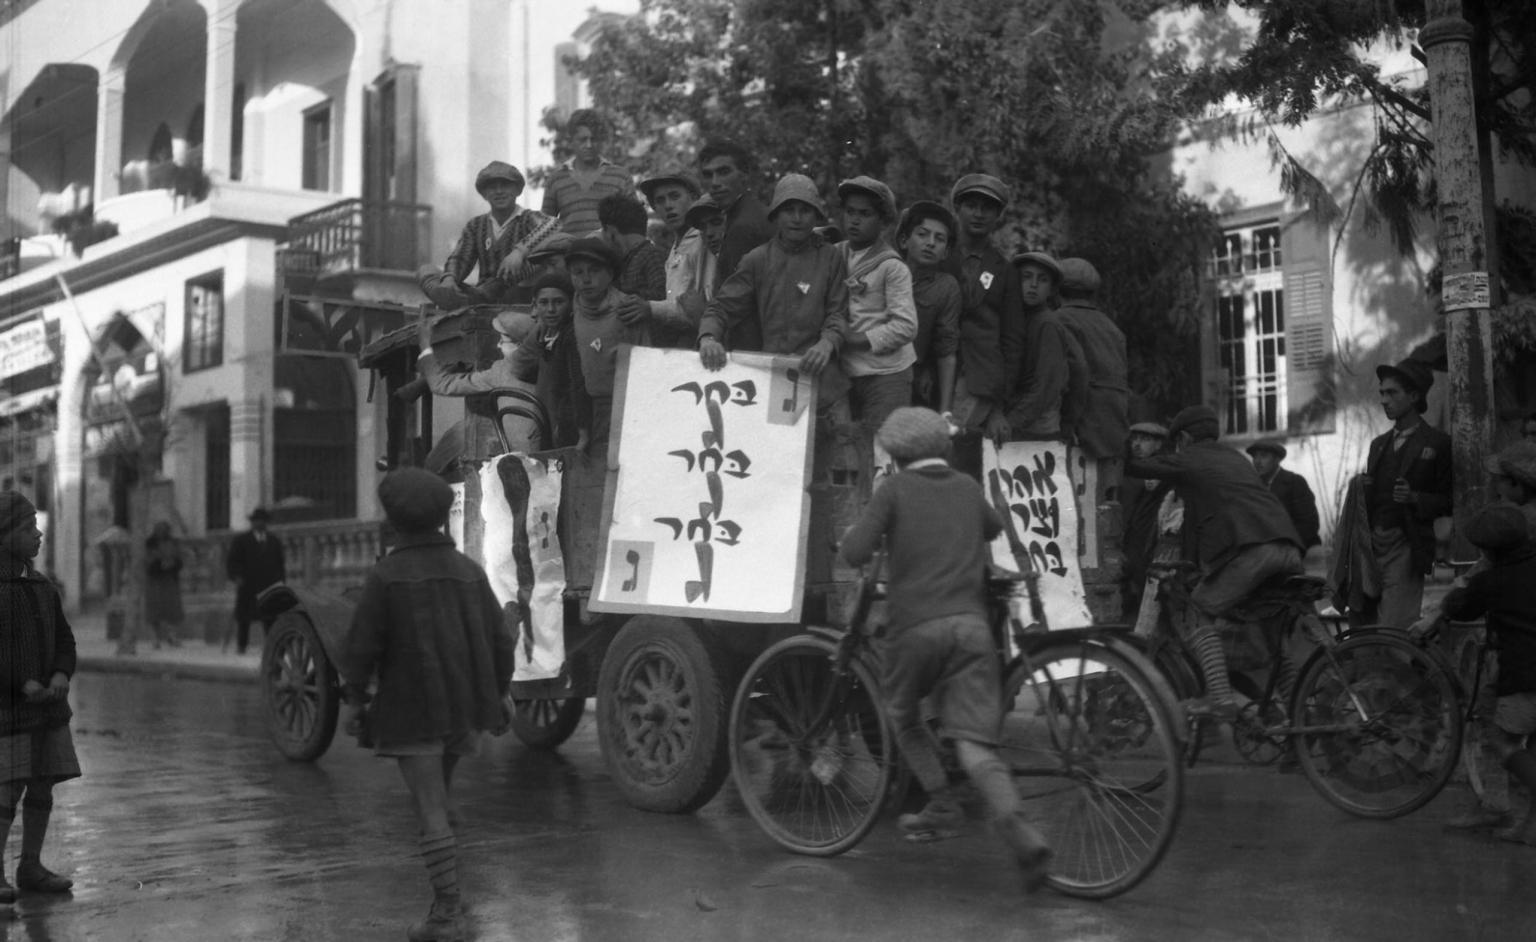 Photograph of men huddled together on a car holding billboards, surrounded by young men on bicycles following them down the street.